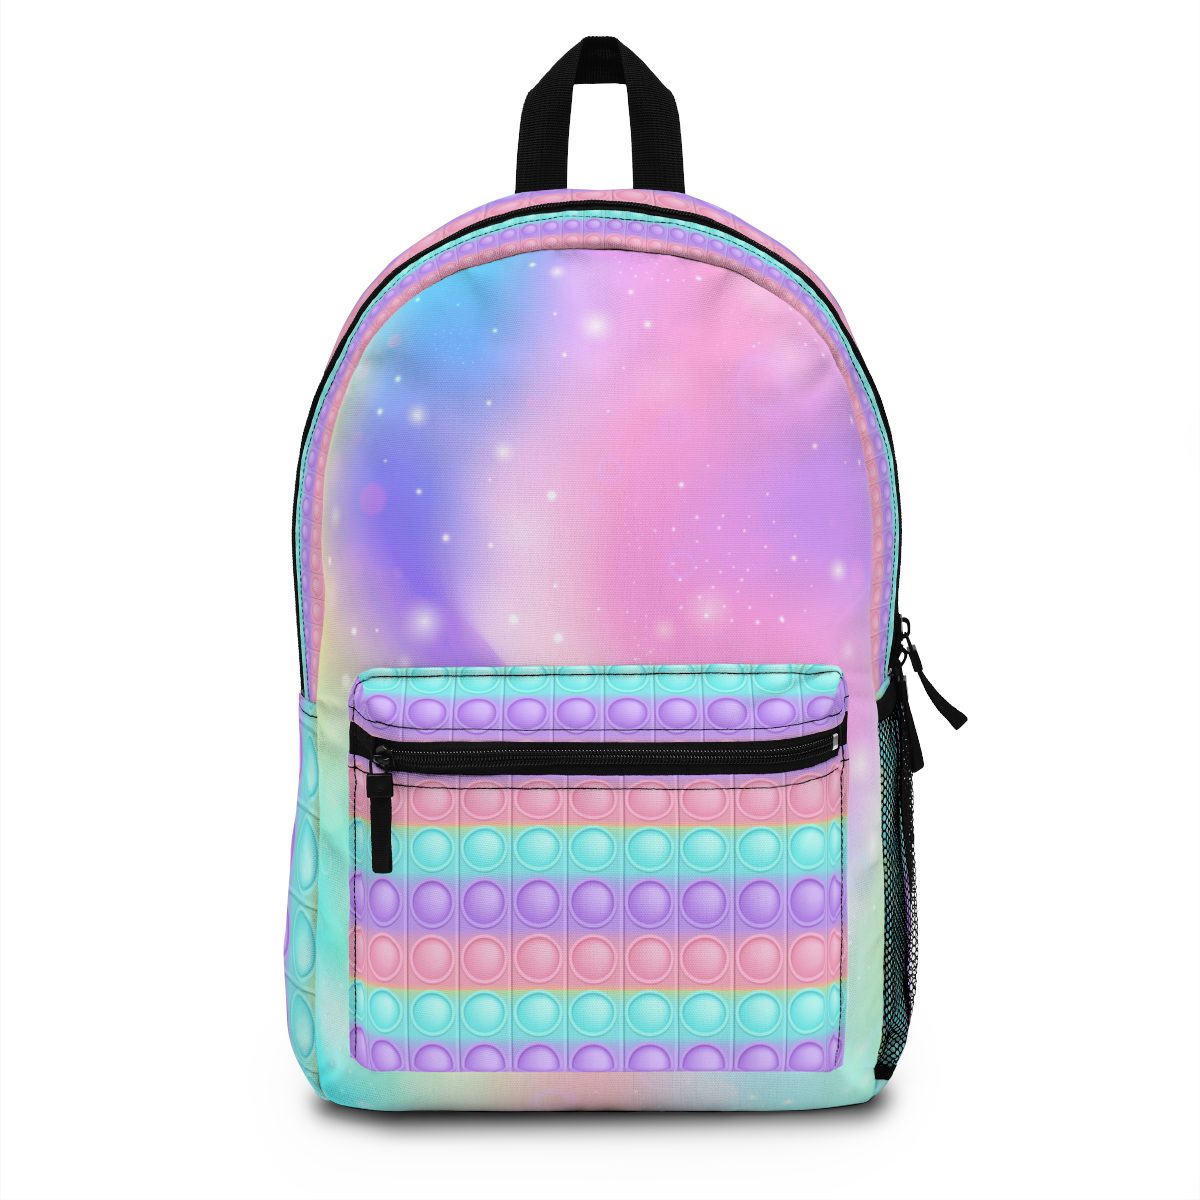 POP IT Simulation style and Bubble Gum Galaxy Backpack Cool Kiddo 10